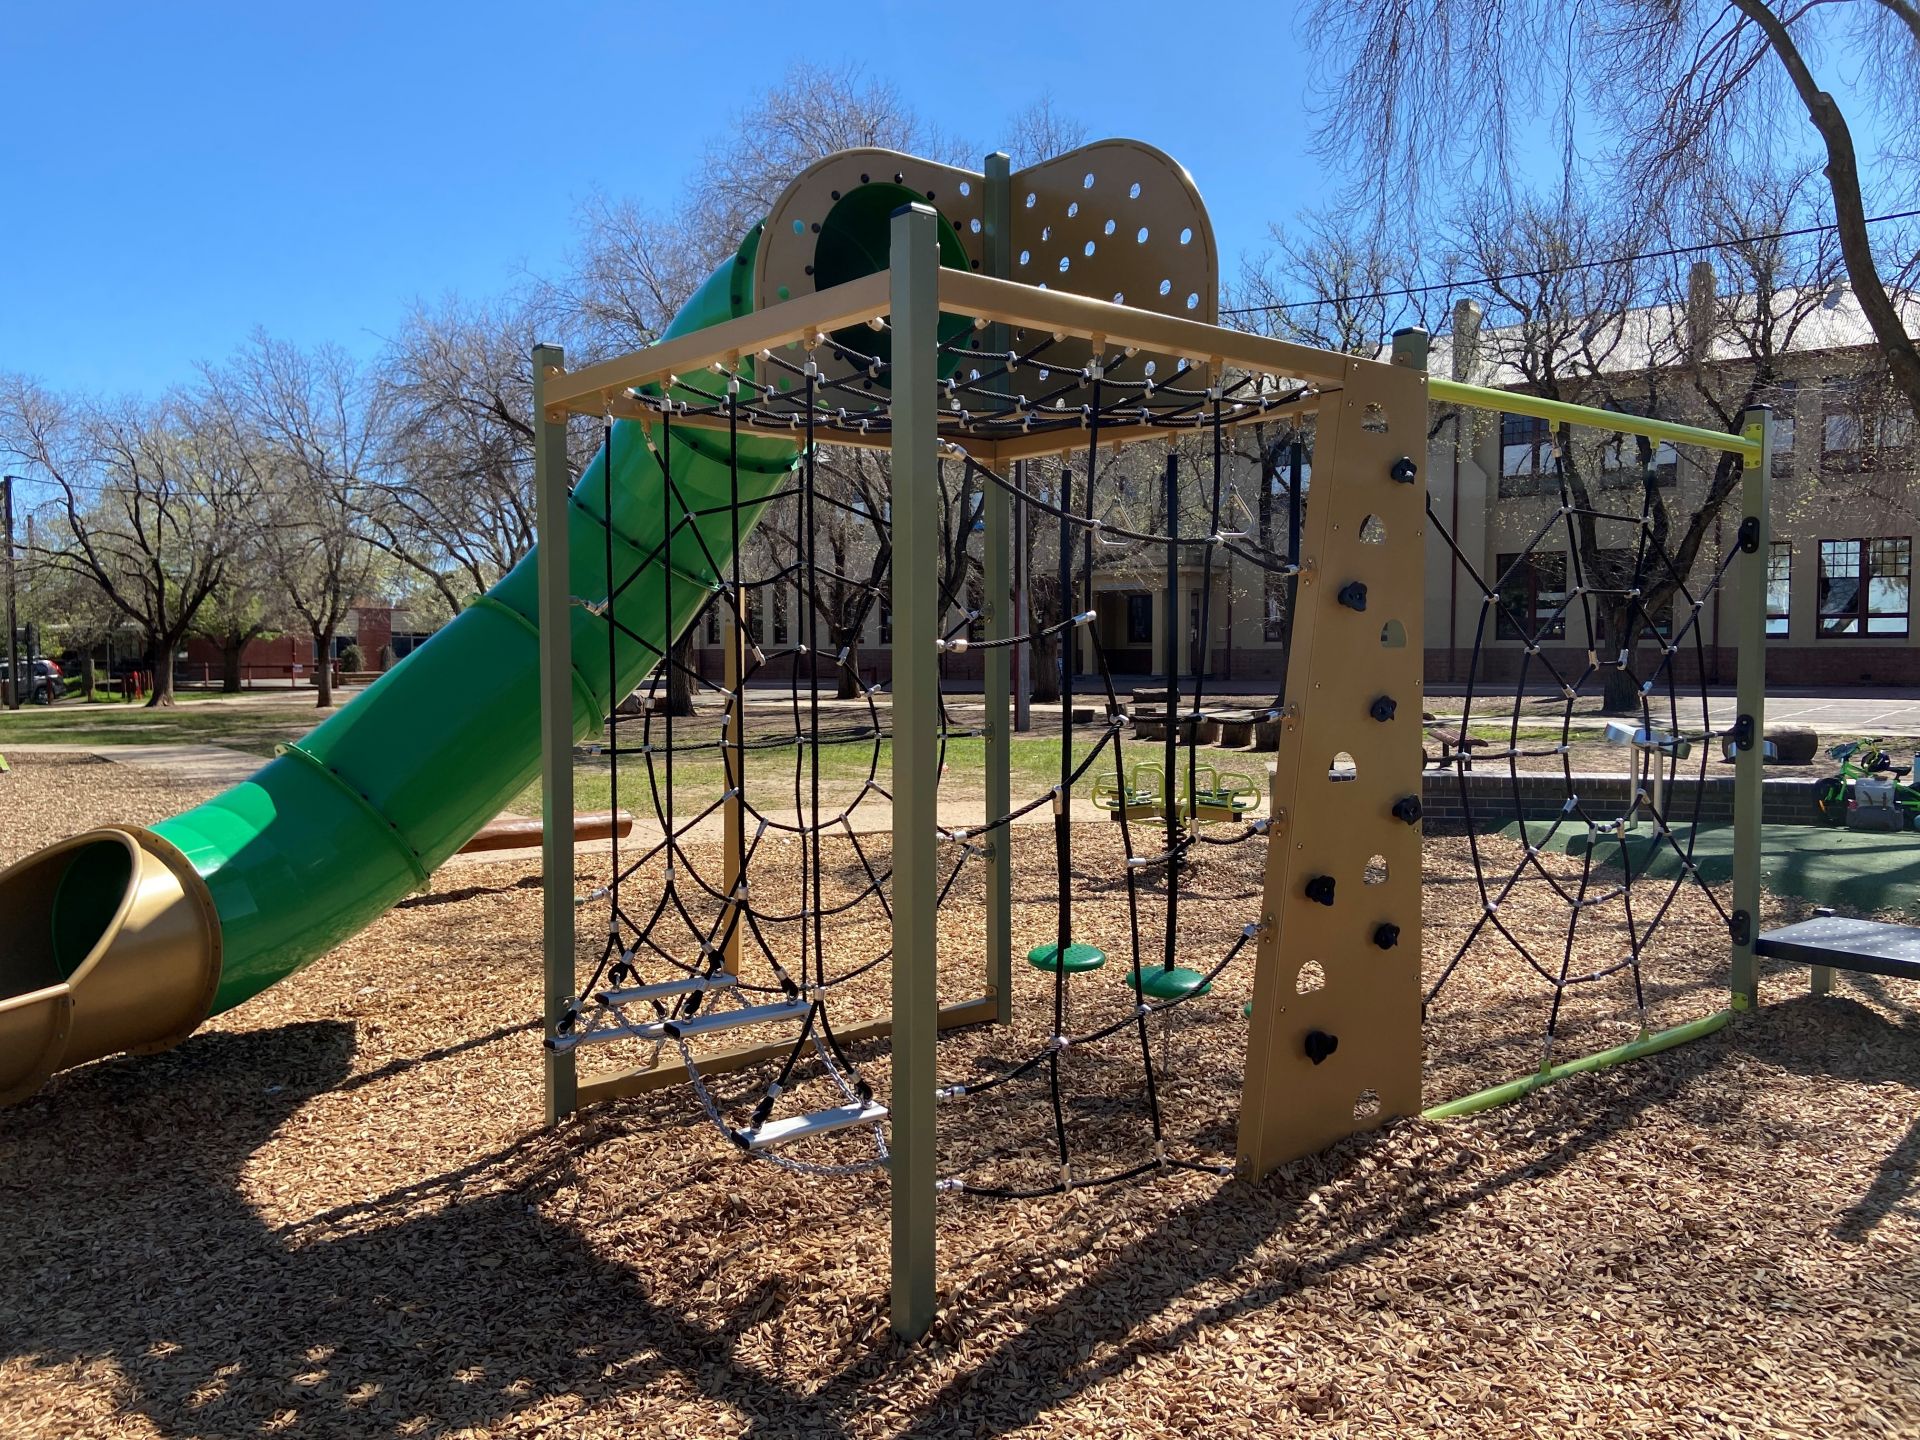 Mortlock Park Slide and Climbing Wall